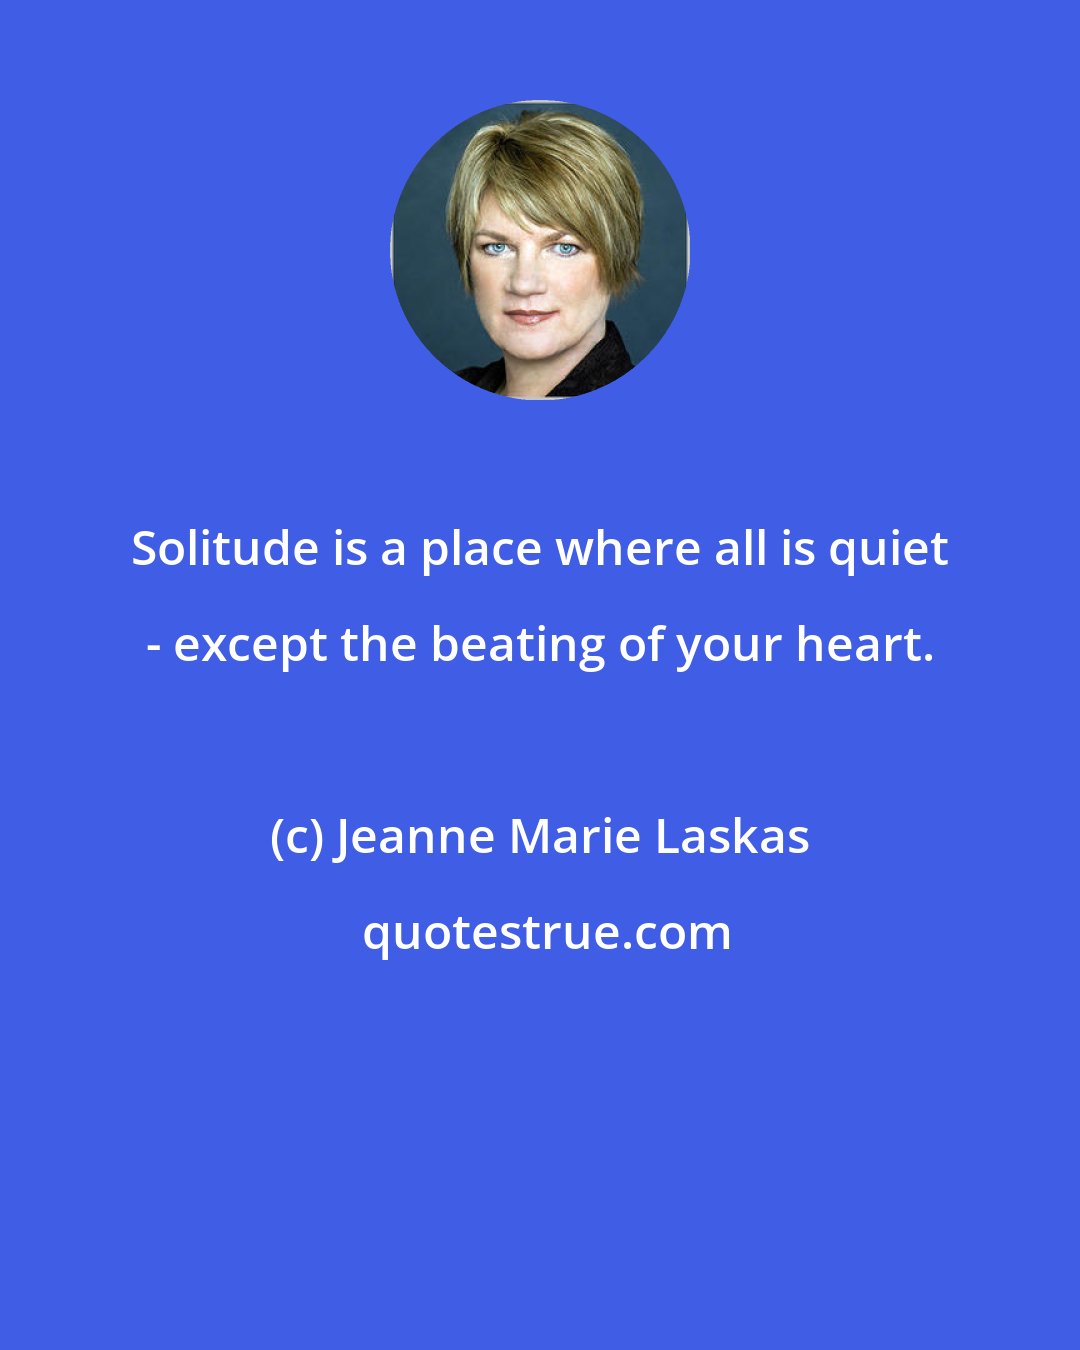 Jeanne Marie Laskas: Solitude is a place where all is quiet - except the beating of your heart.